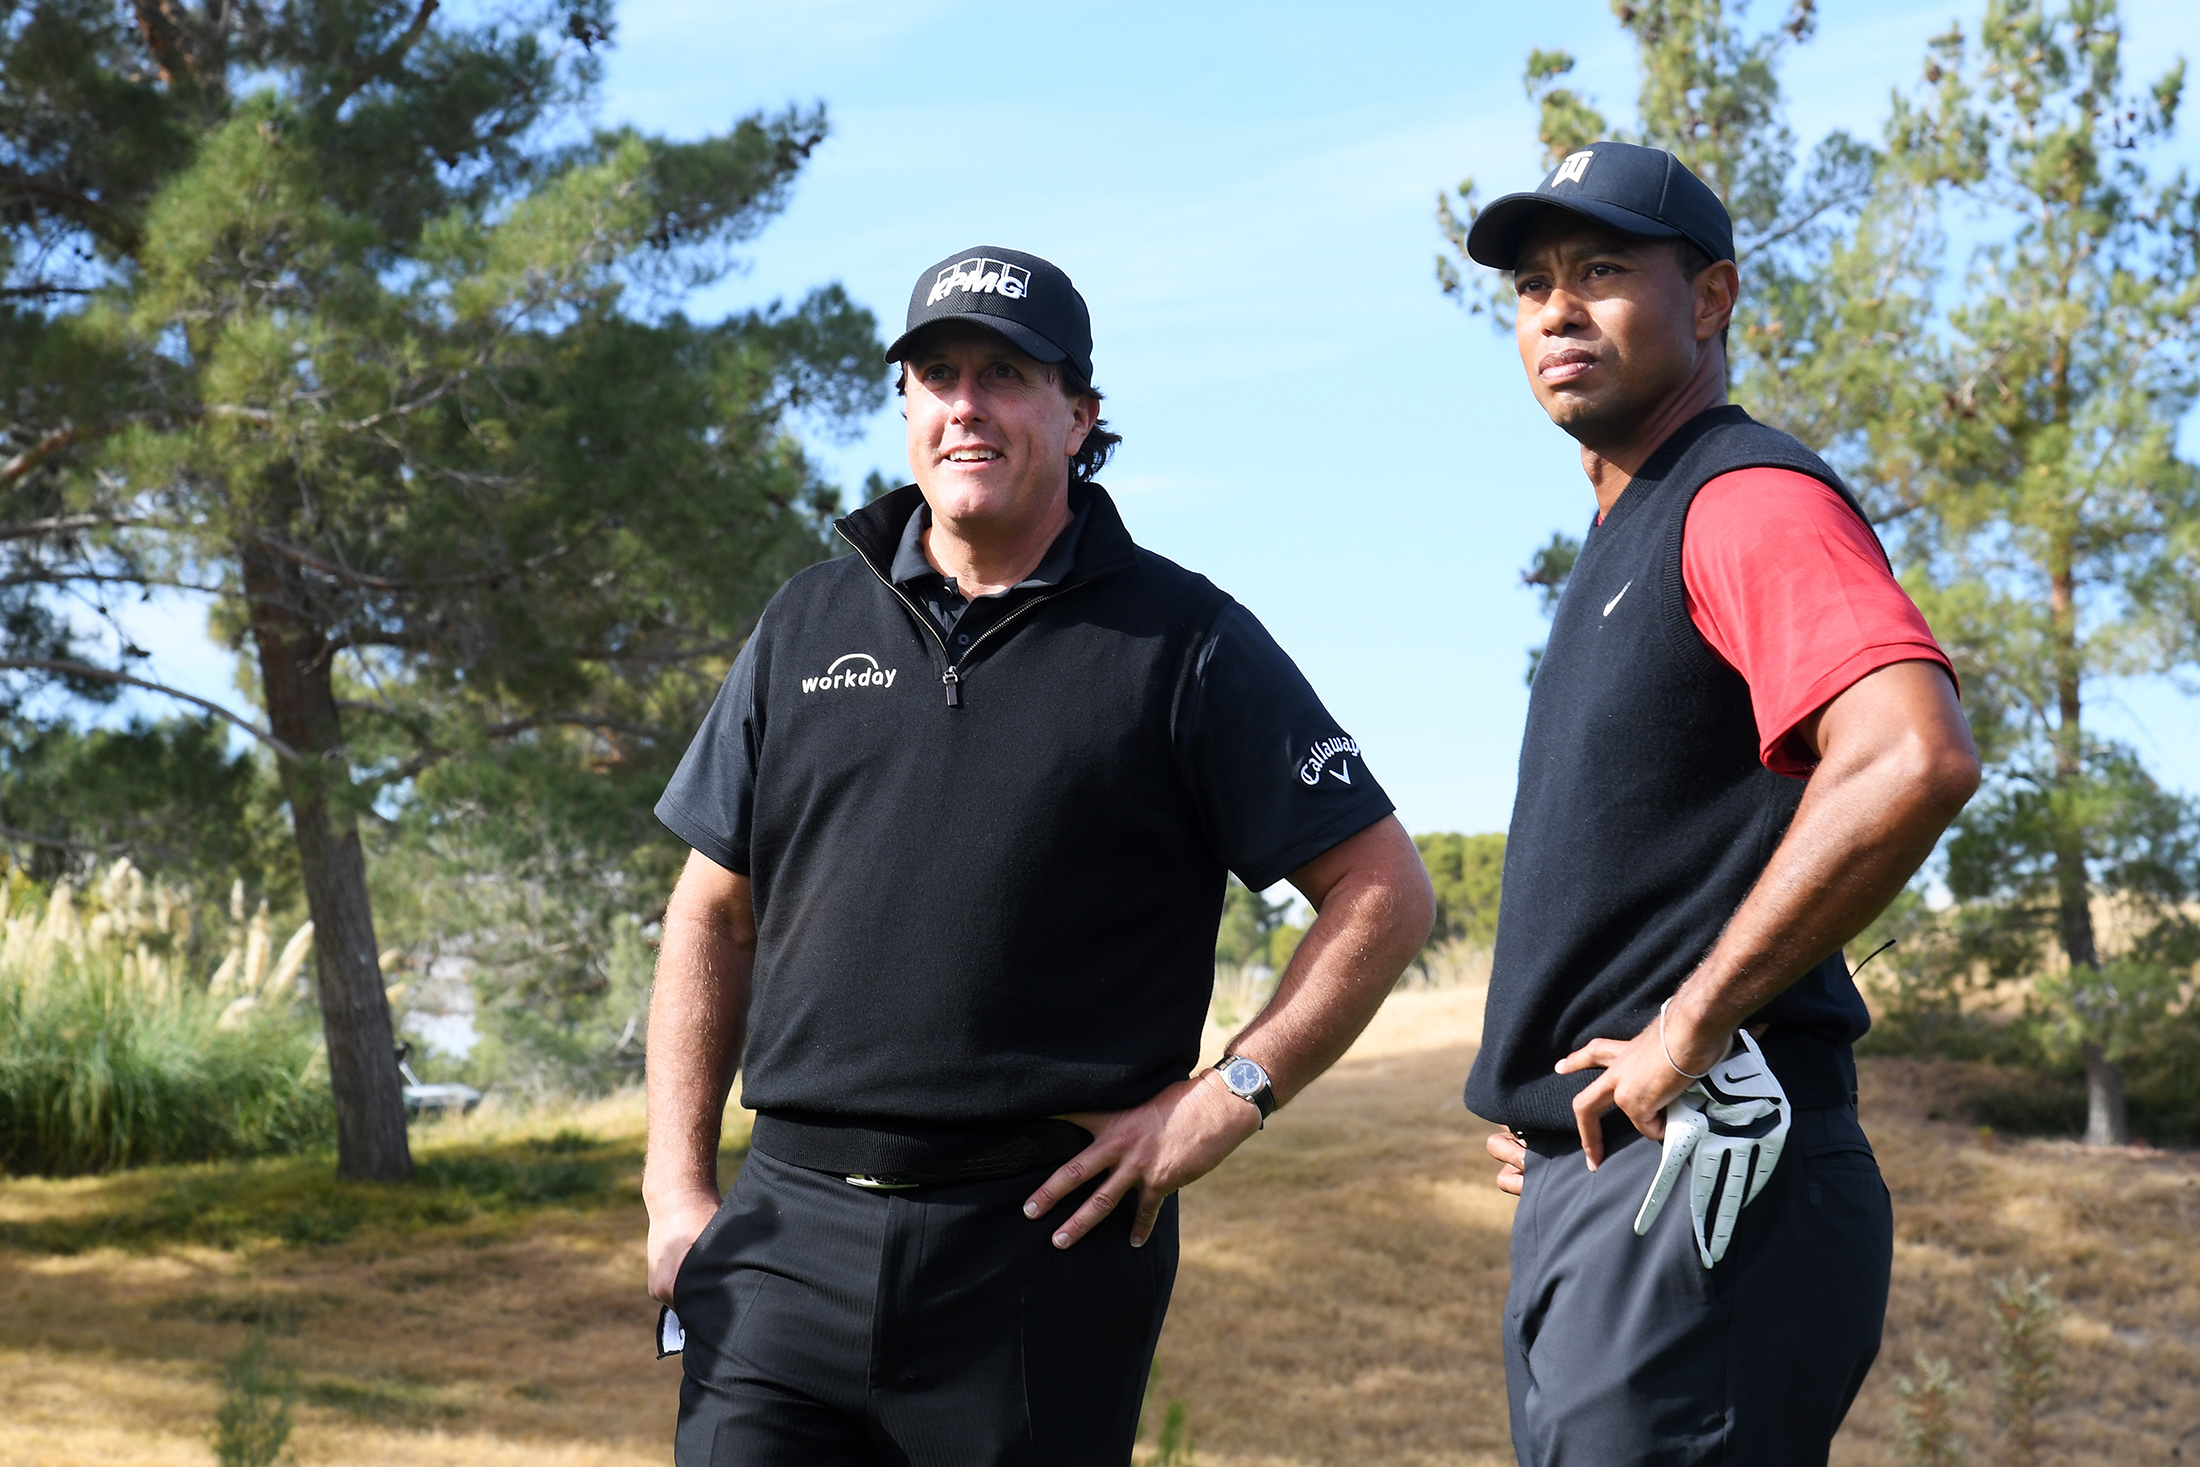 Tiger Woods and Phil Mickelson before the match on Nov. 23, 2018.